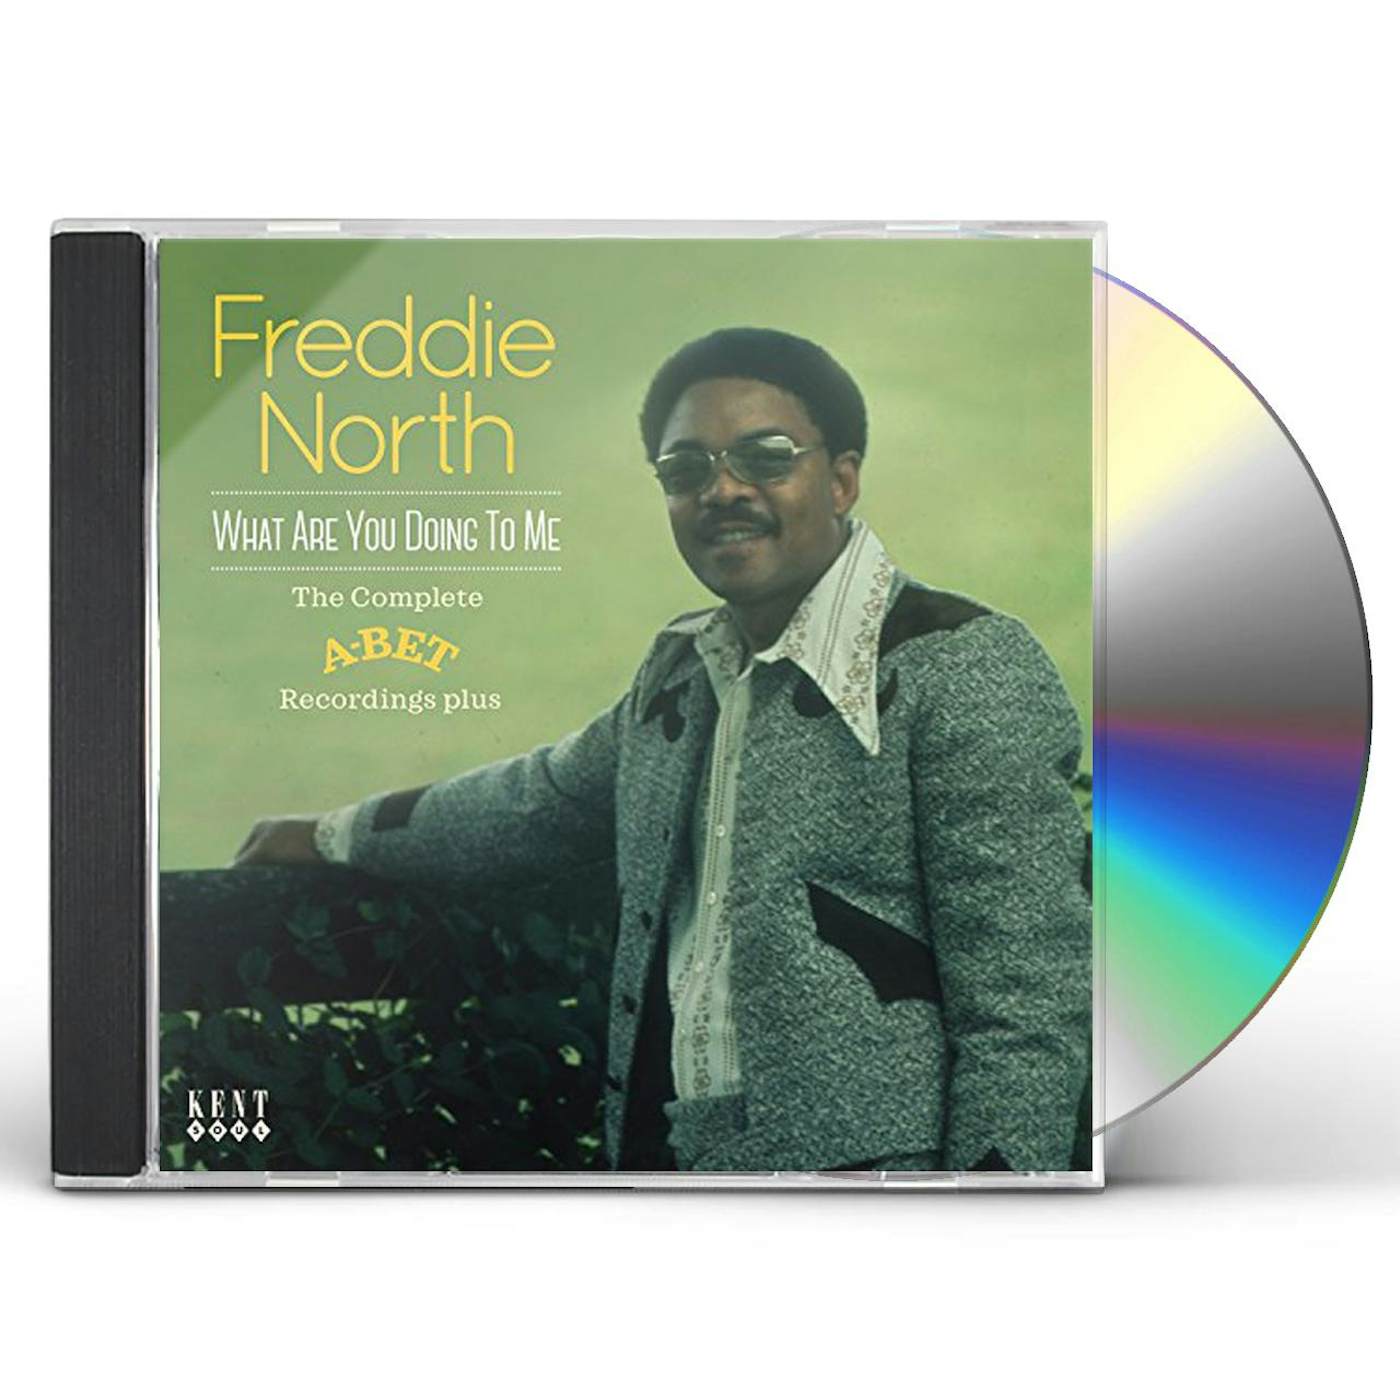 Freddie North WHAT ARE YOU DOING TO ME: COMP A-BET RECORDINGS CD